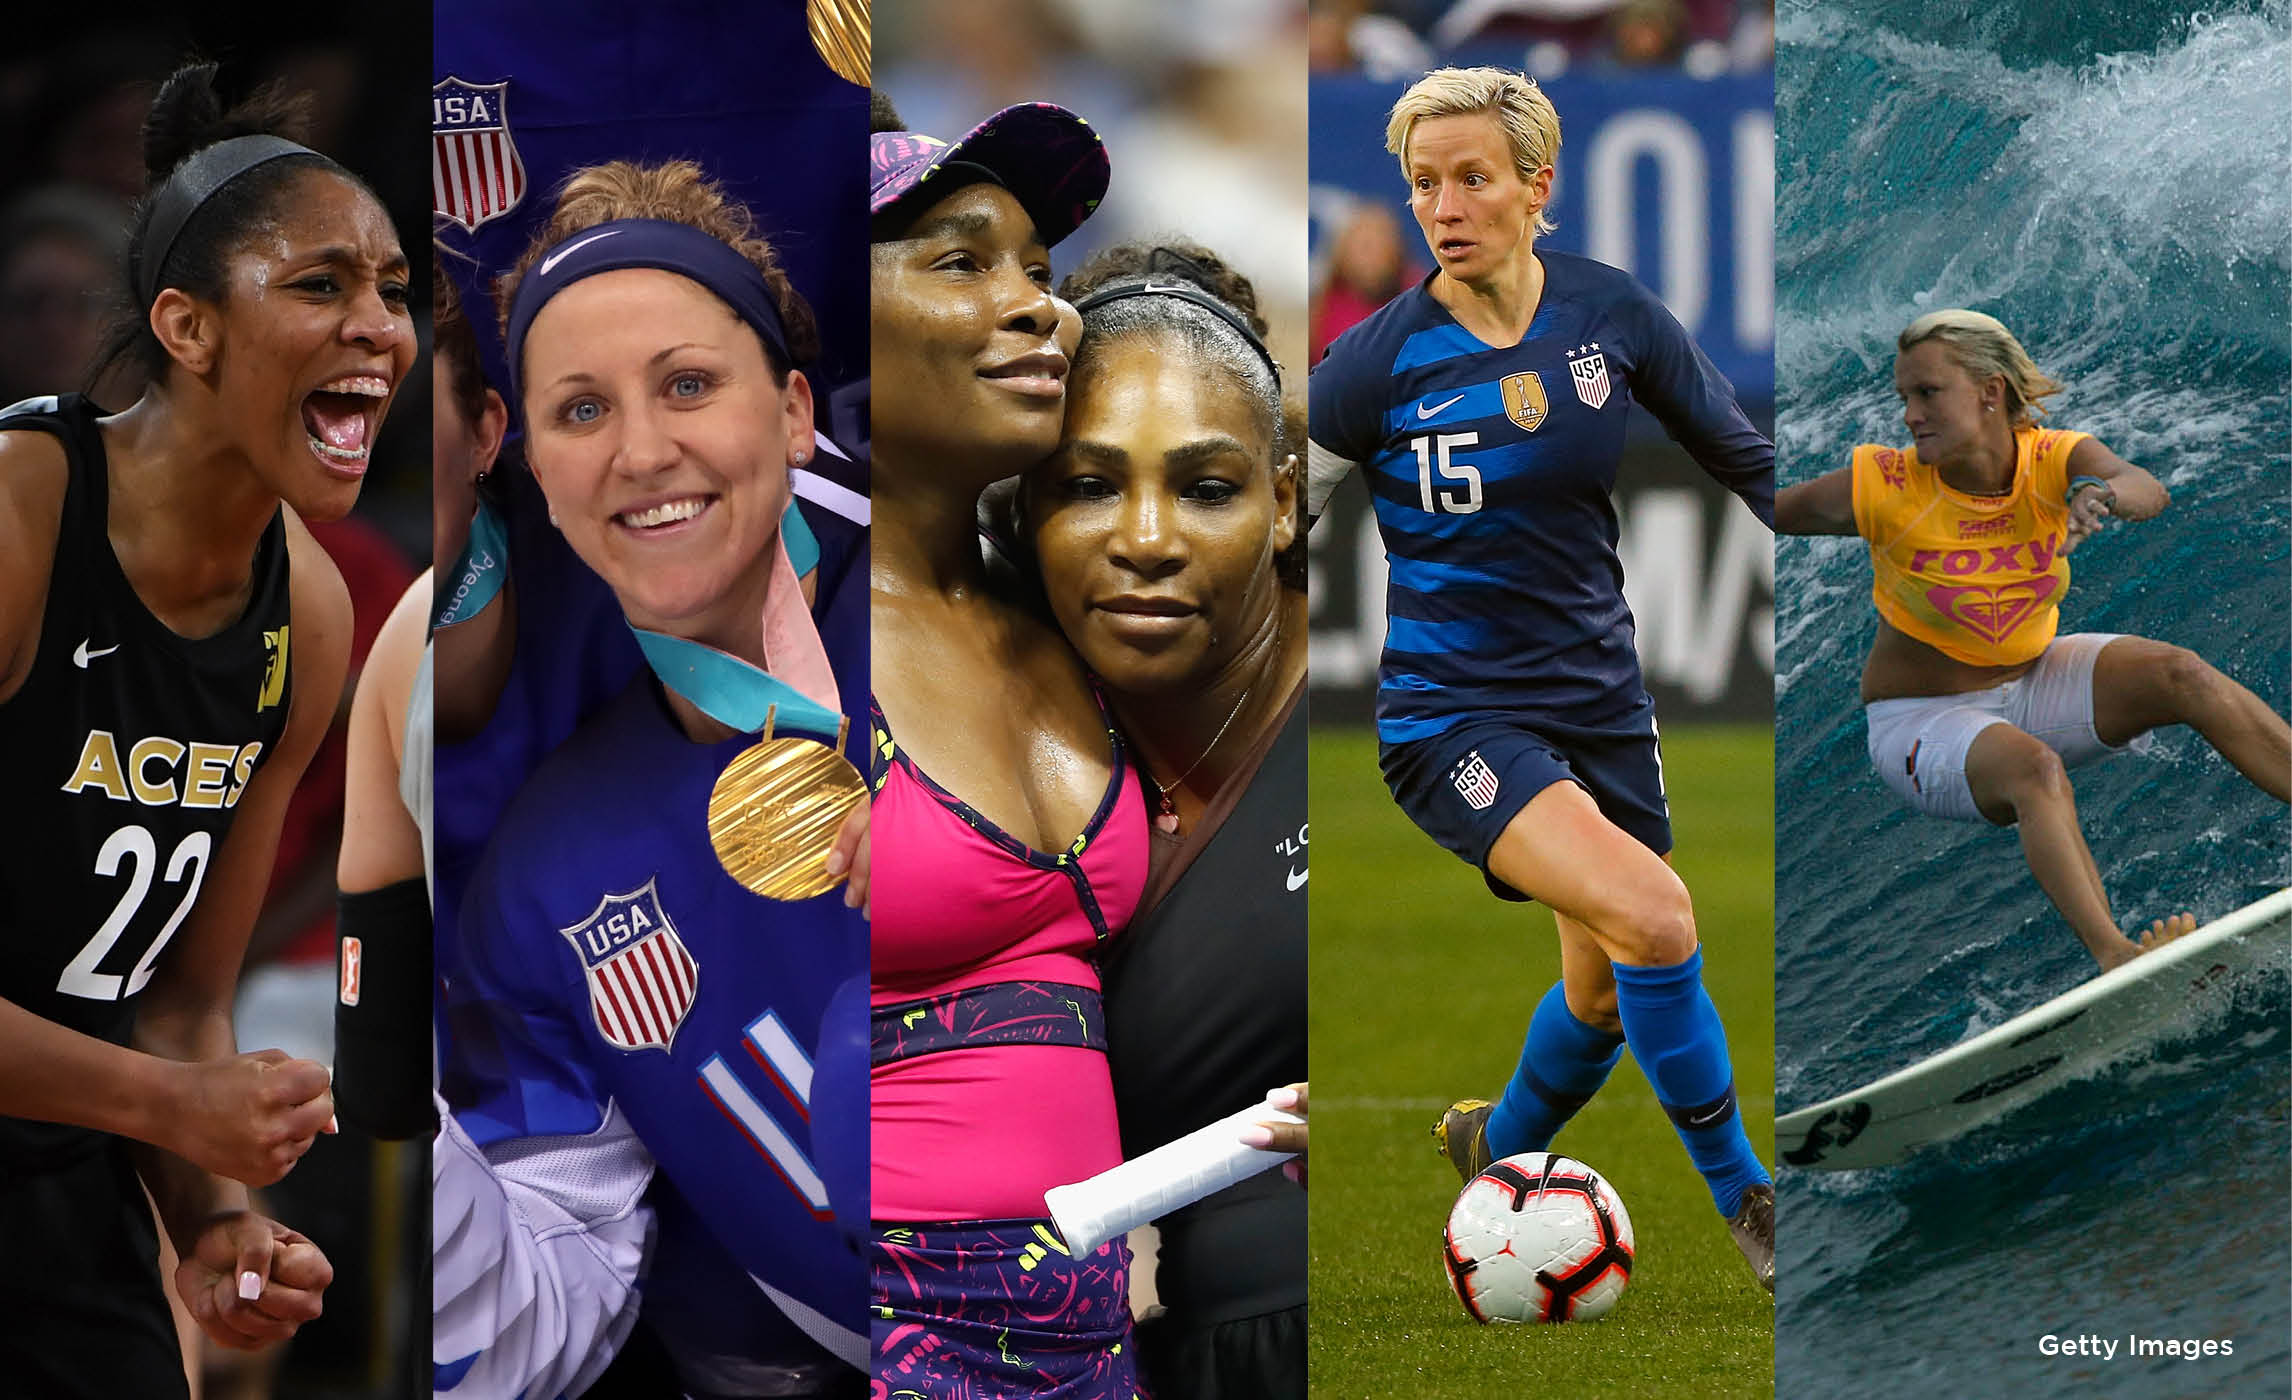 Star Surfers Honor Female Athletes for International Women's Day